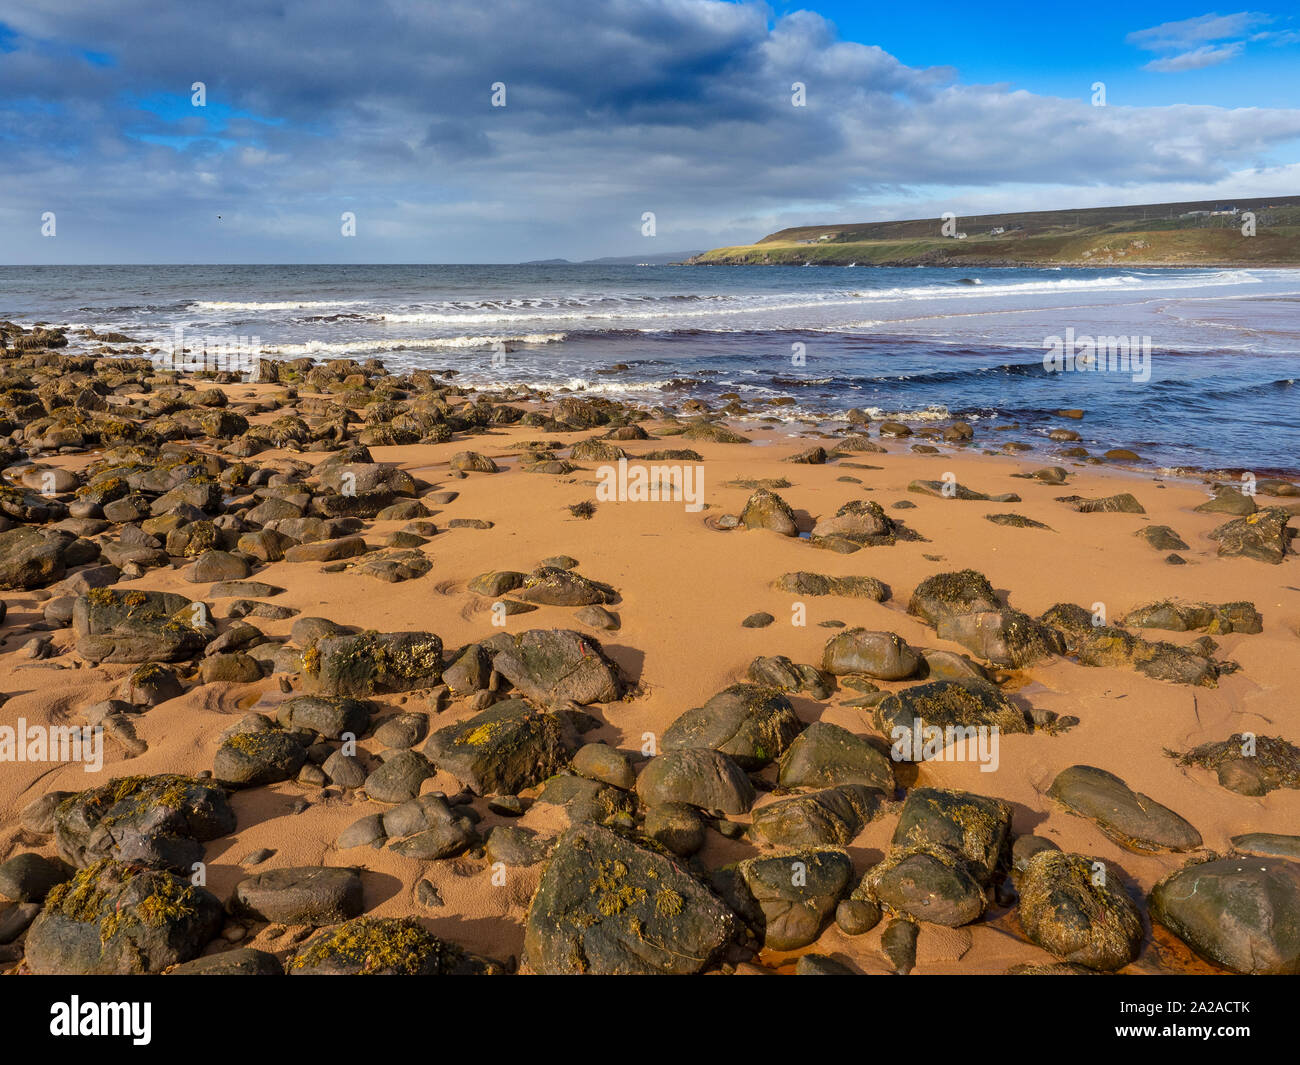 Slaggan Bay beach on the banks of the Minch Wester ross Scotland Stock Photo